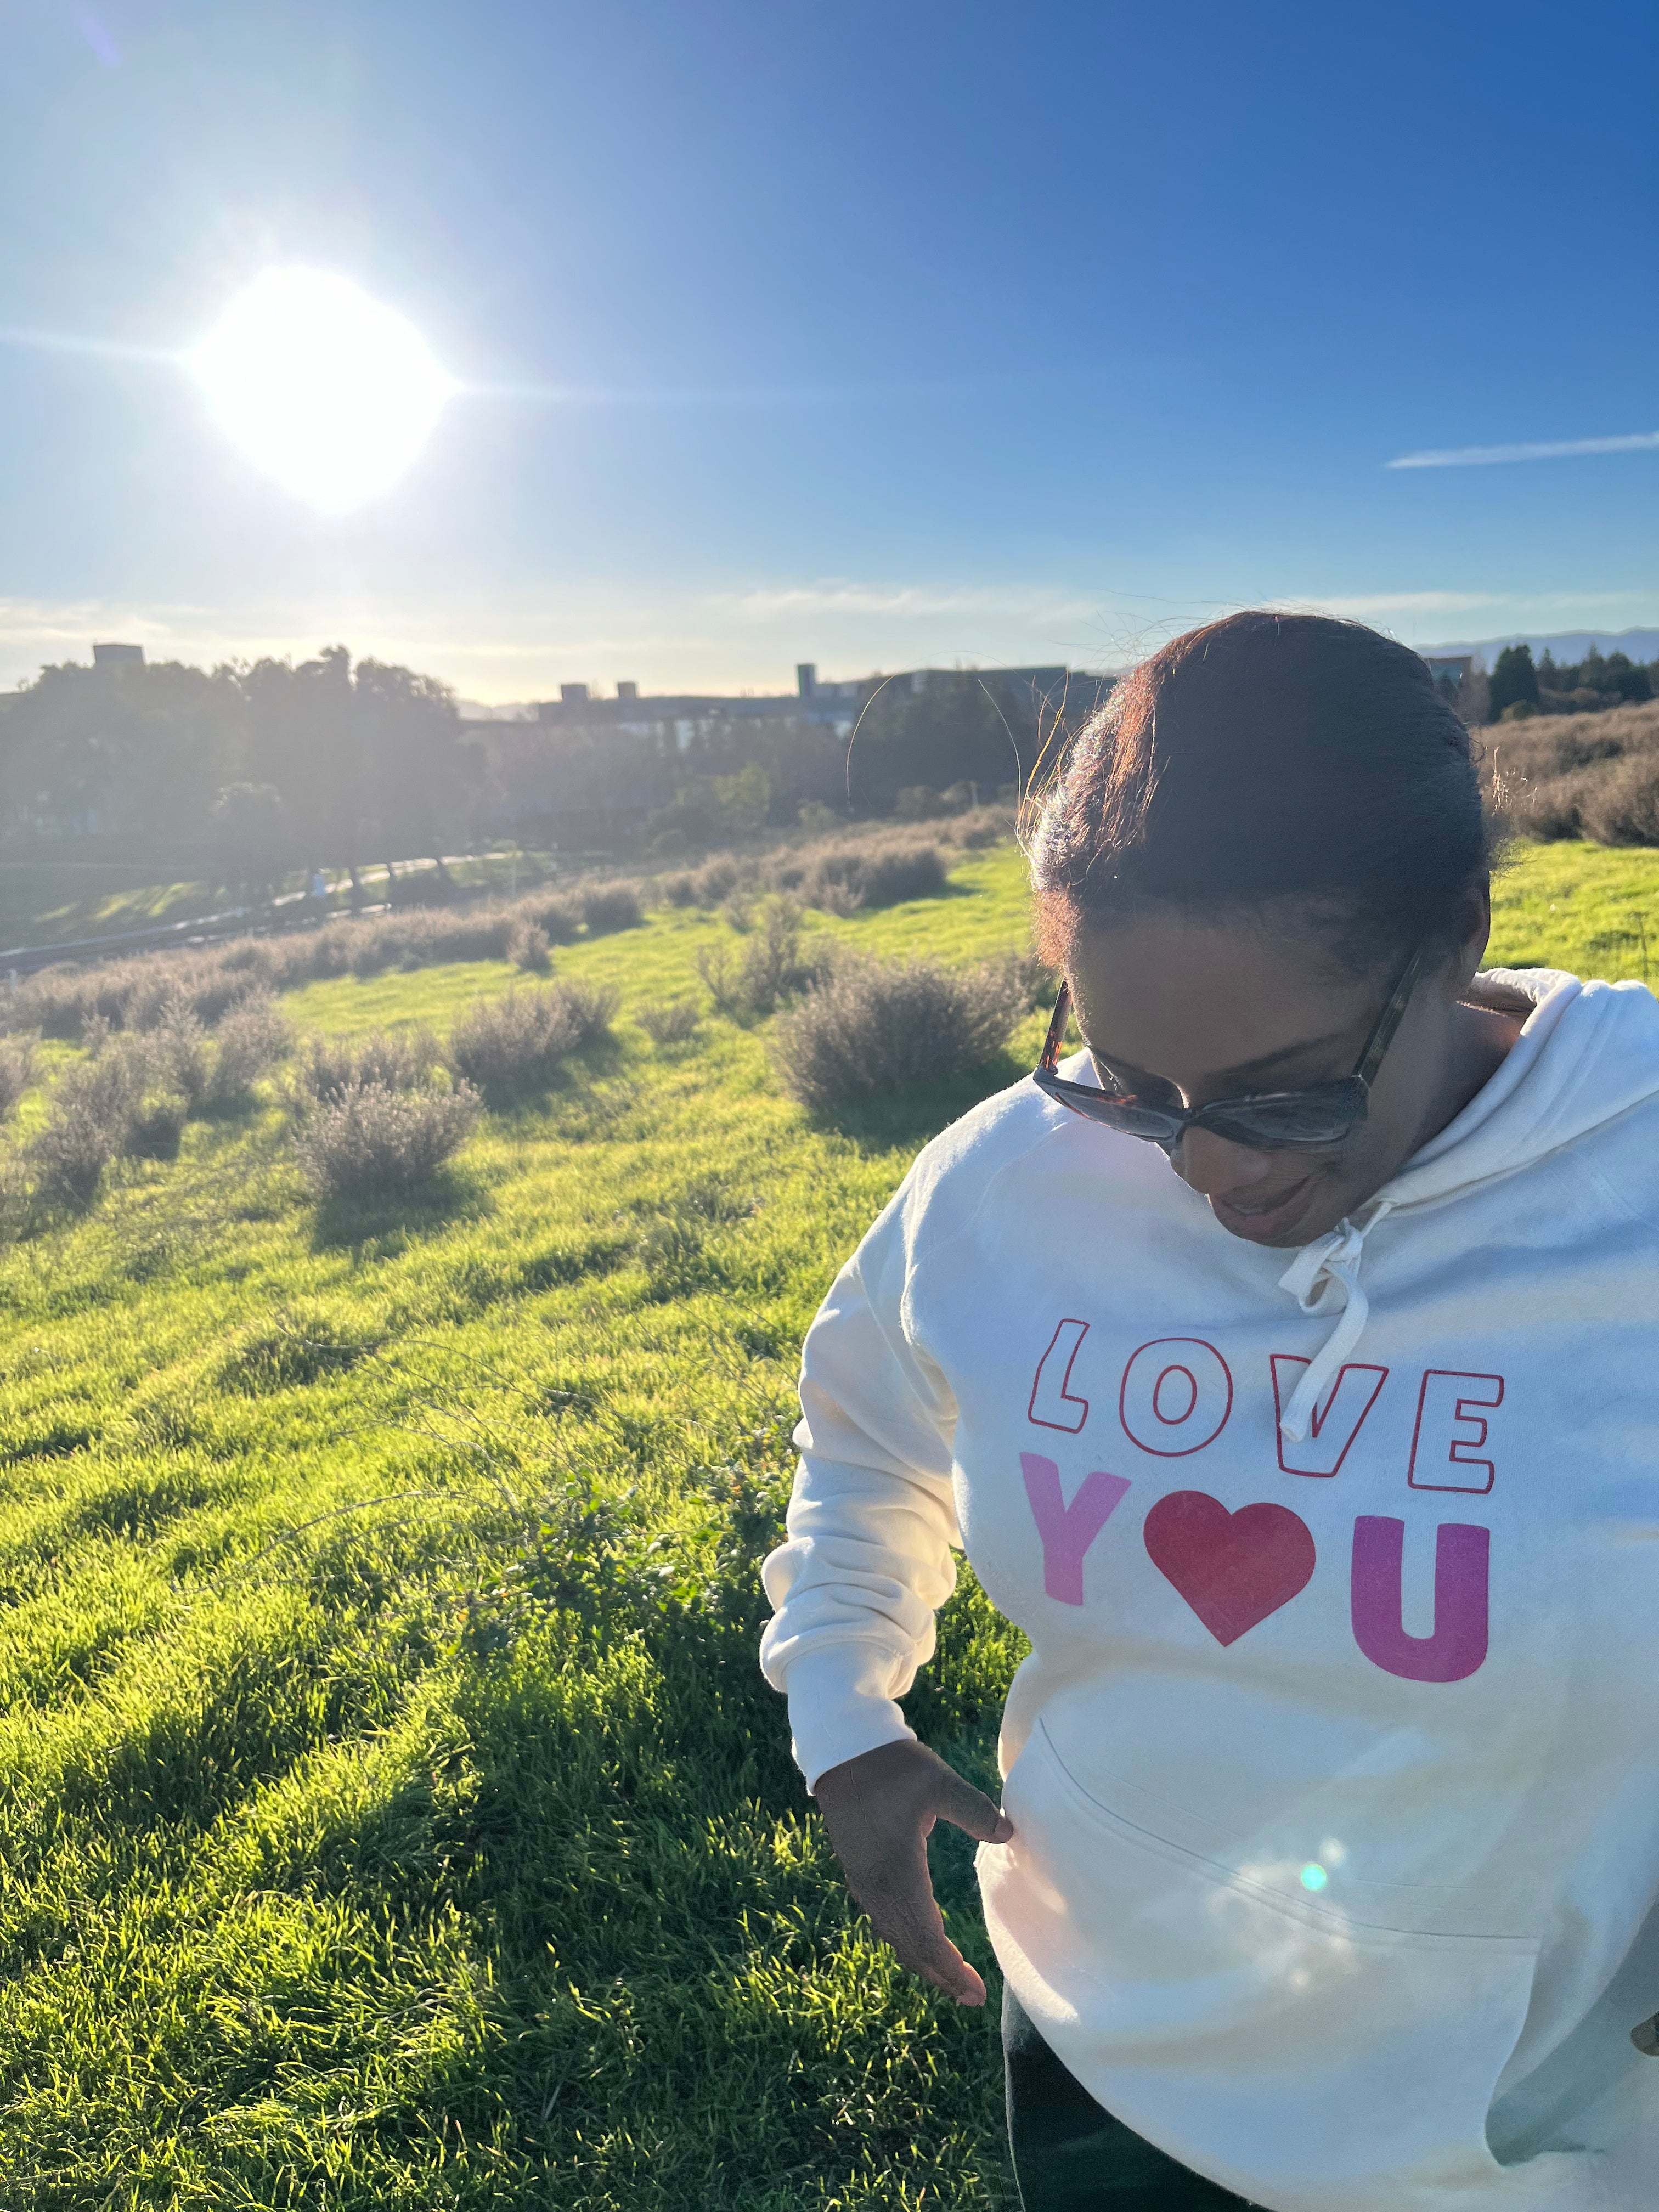 LOVE YOU by Awayday Cozy Hoodie